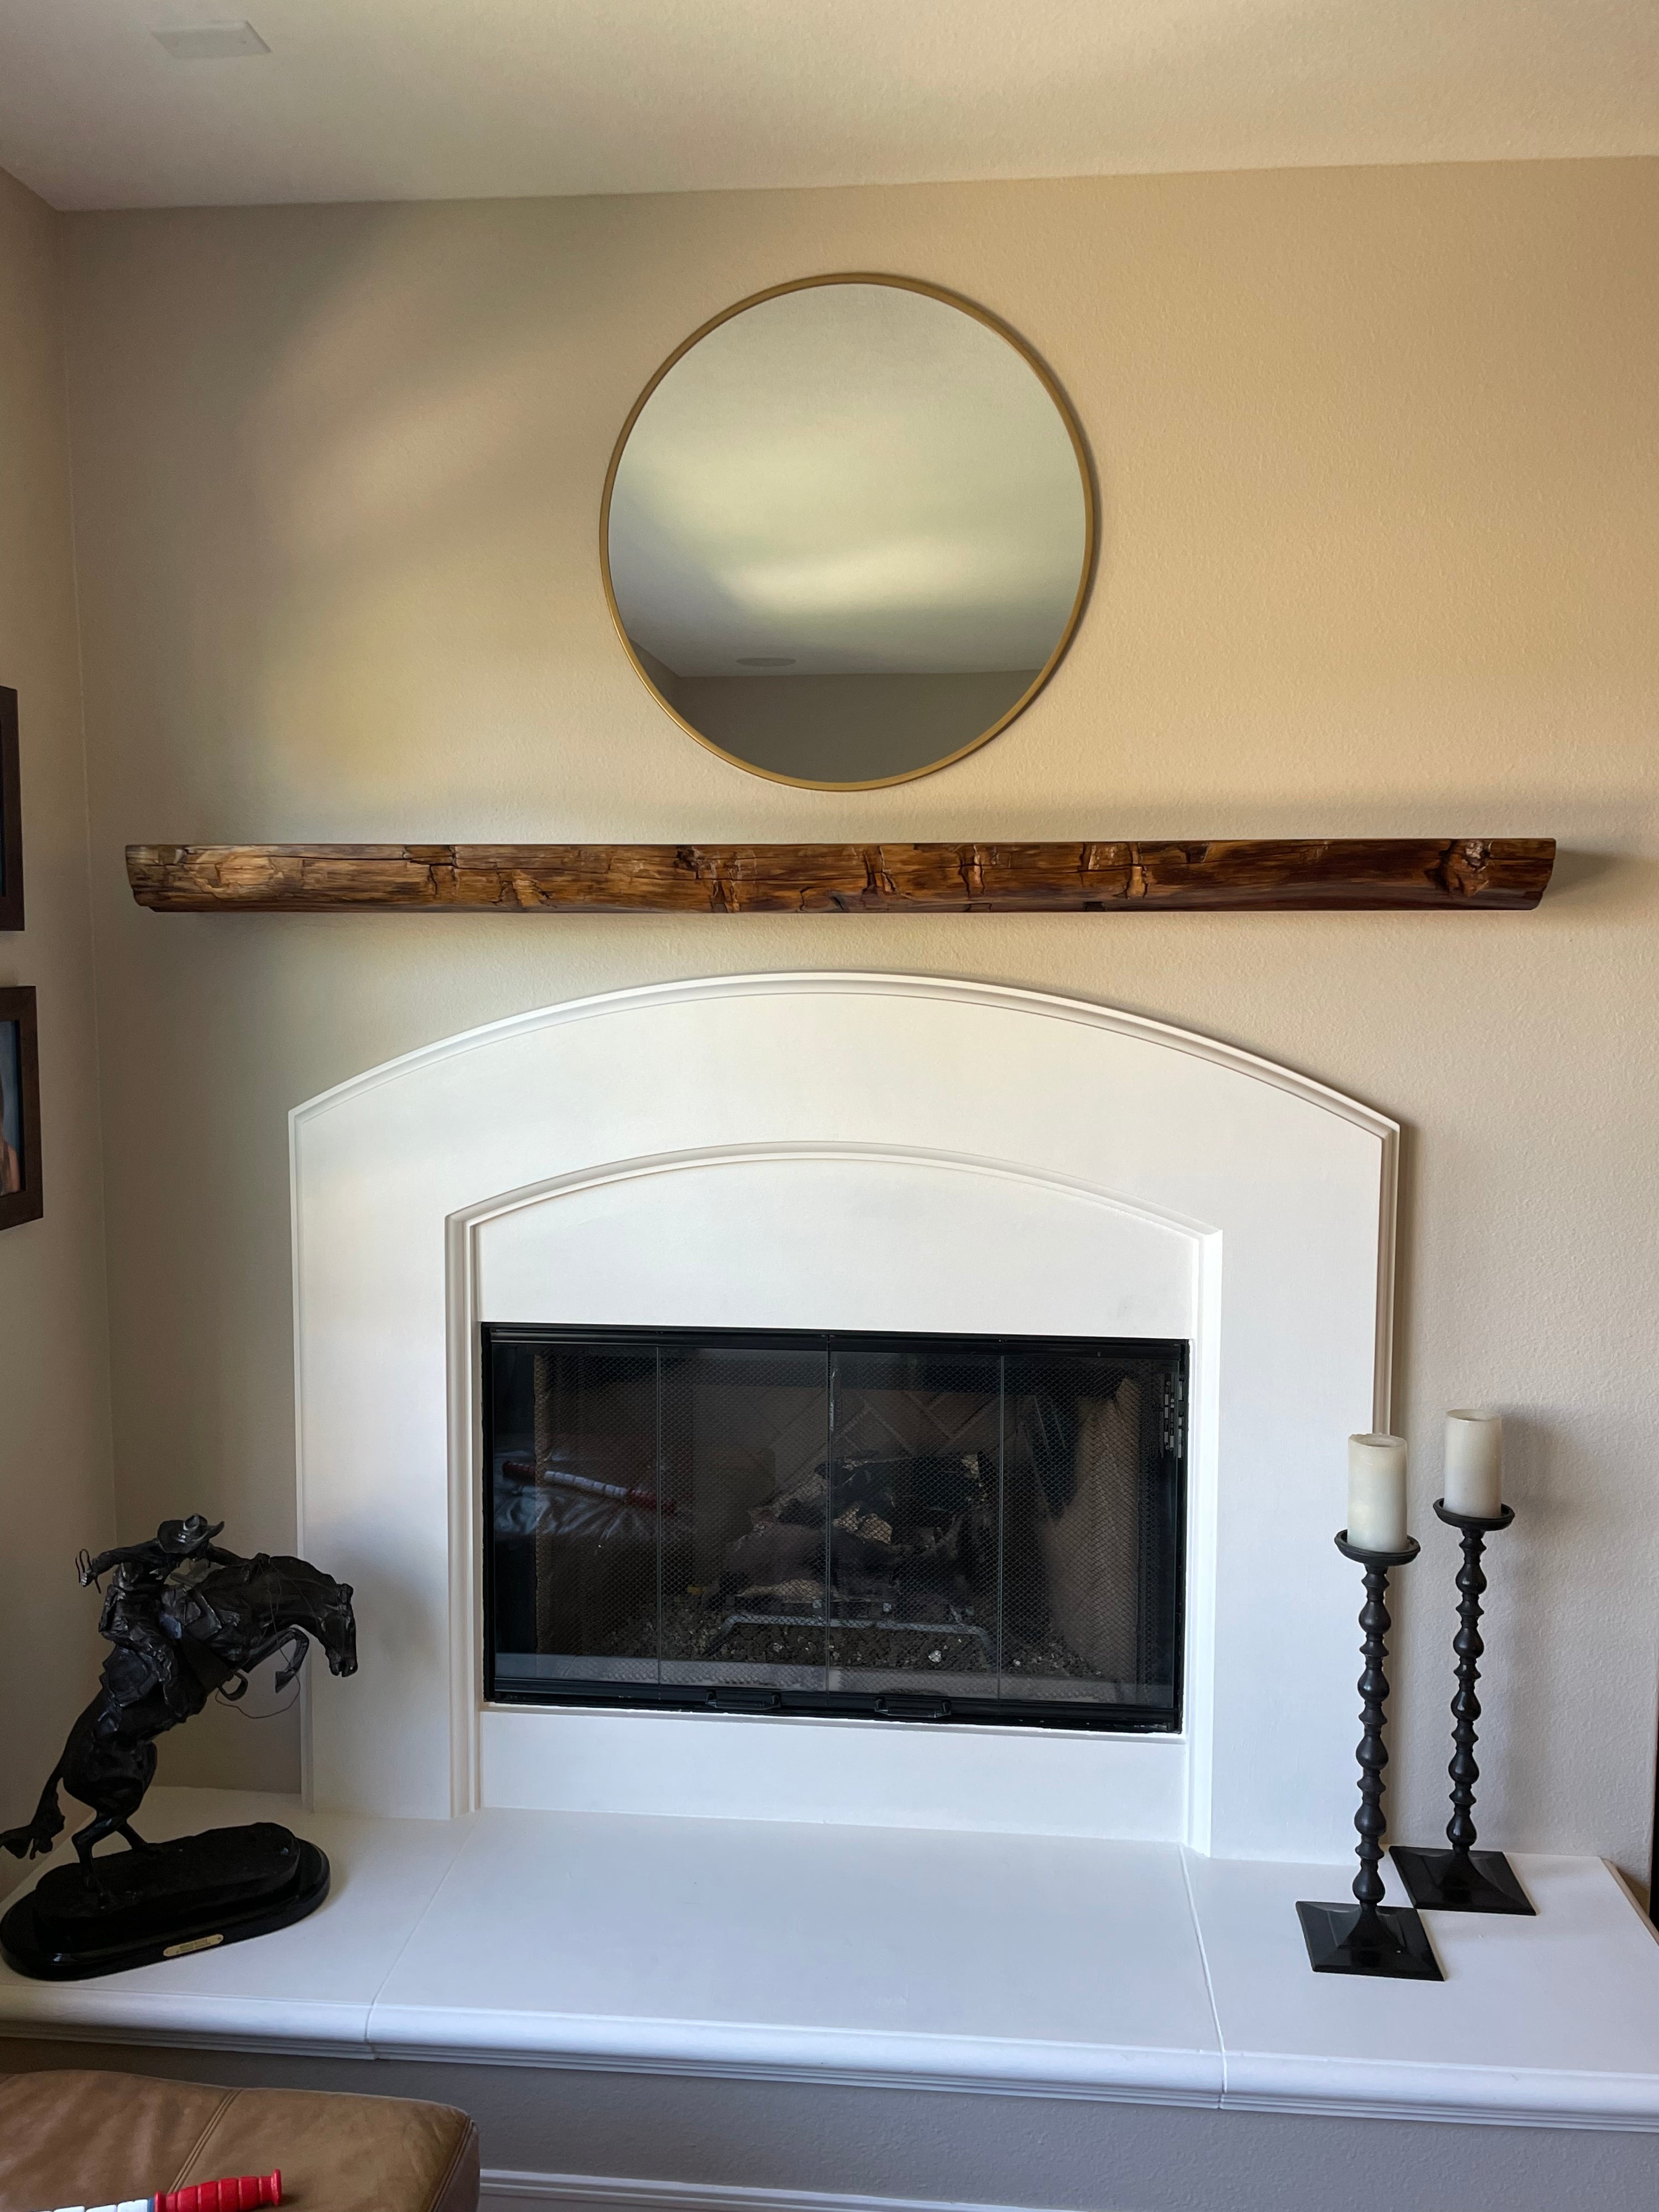 floating mantel height from floor - Old Fashioned Lumber has the best live edge mantels